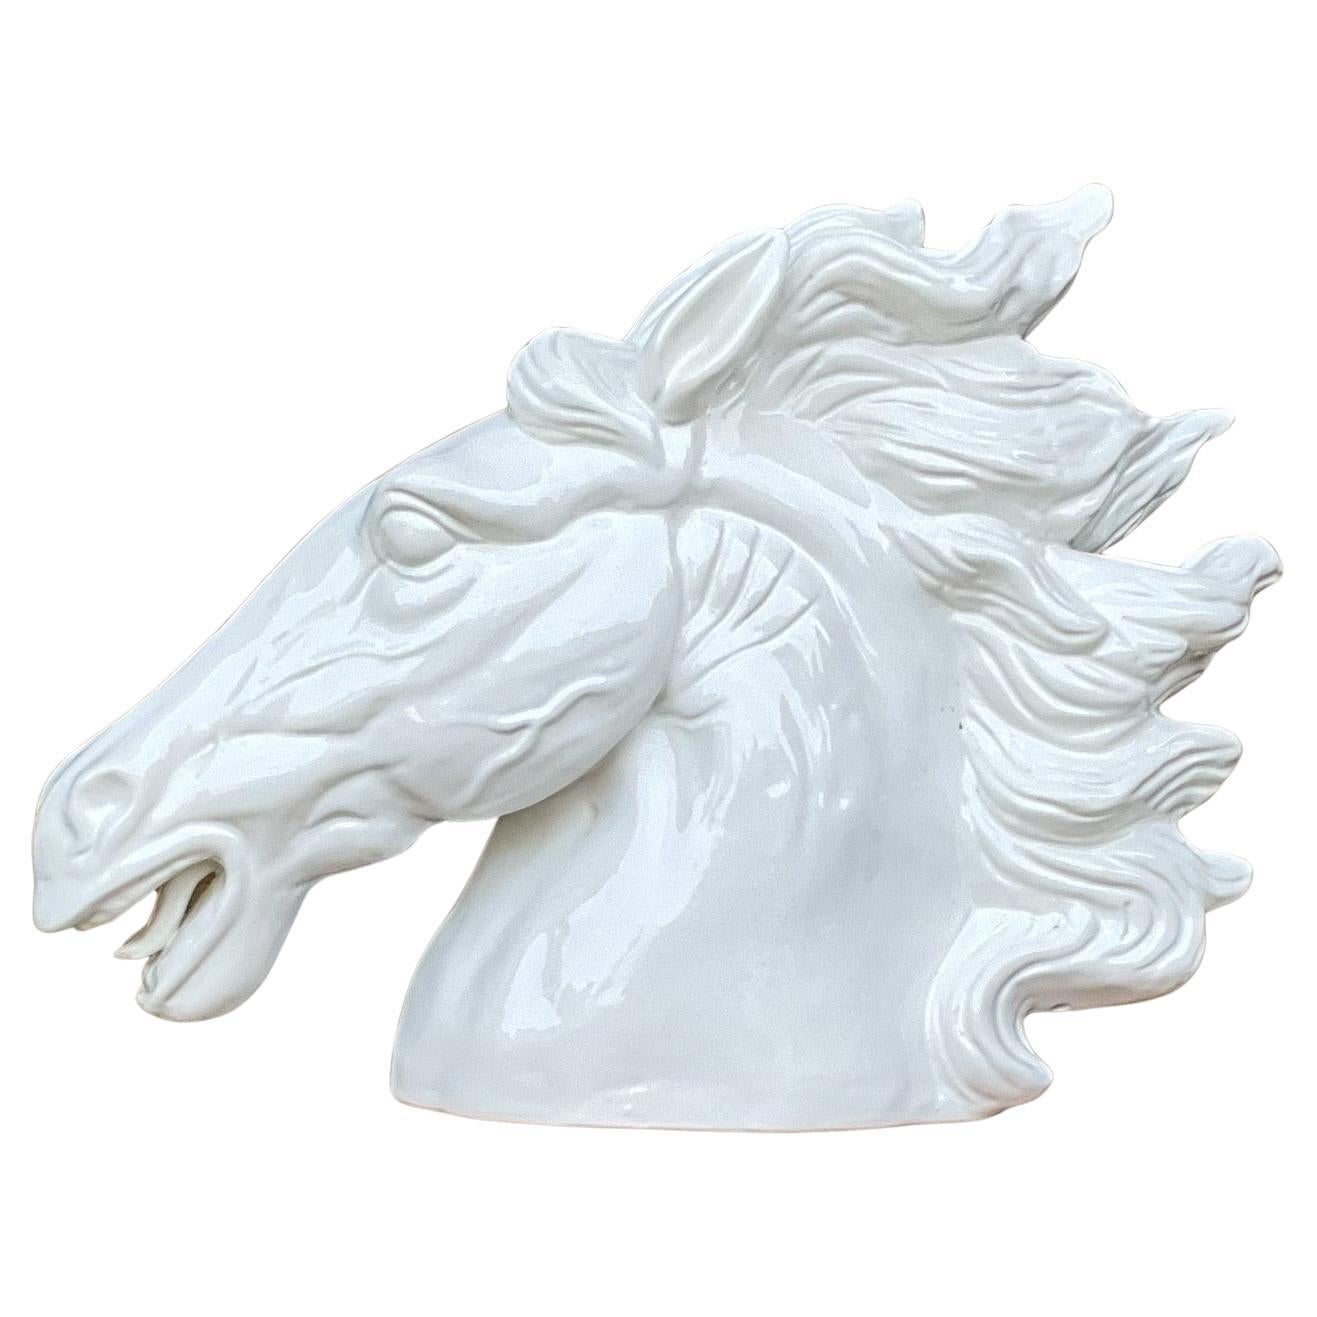 Large Scale White Neo-Classical Style Ceramic Horse Bust Figurine / Statue